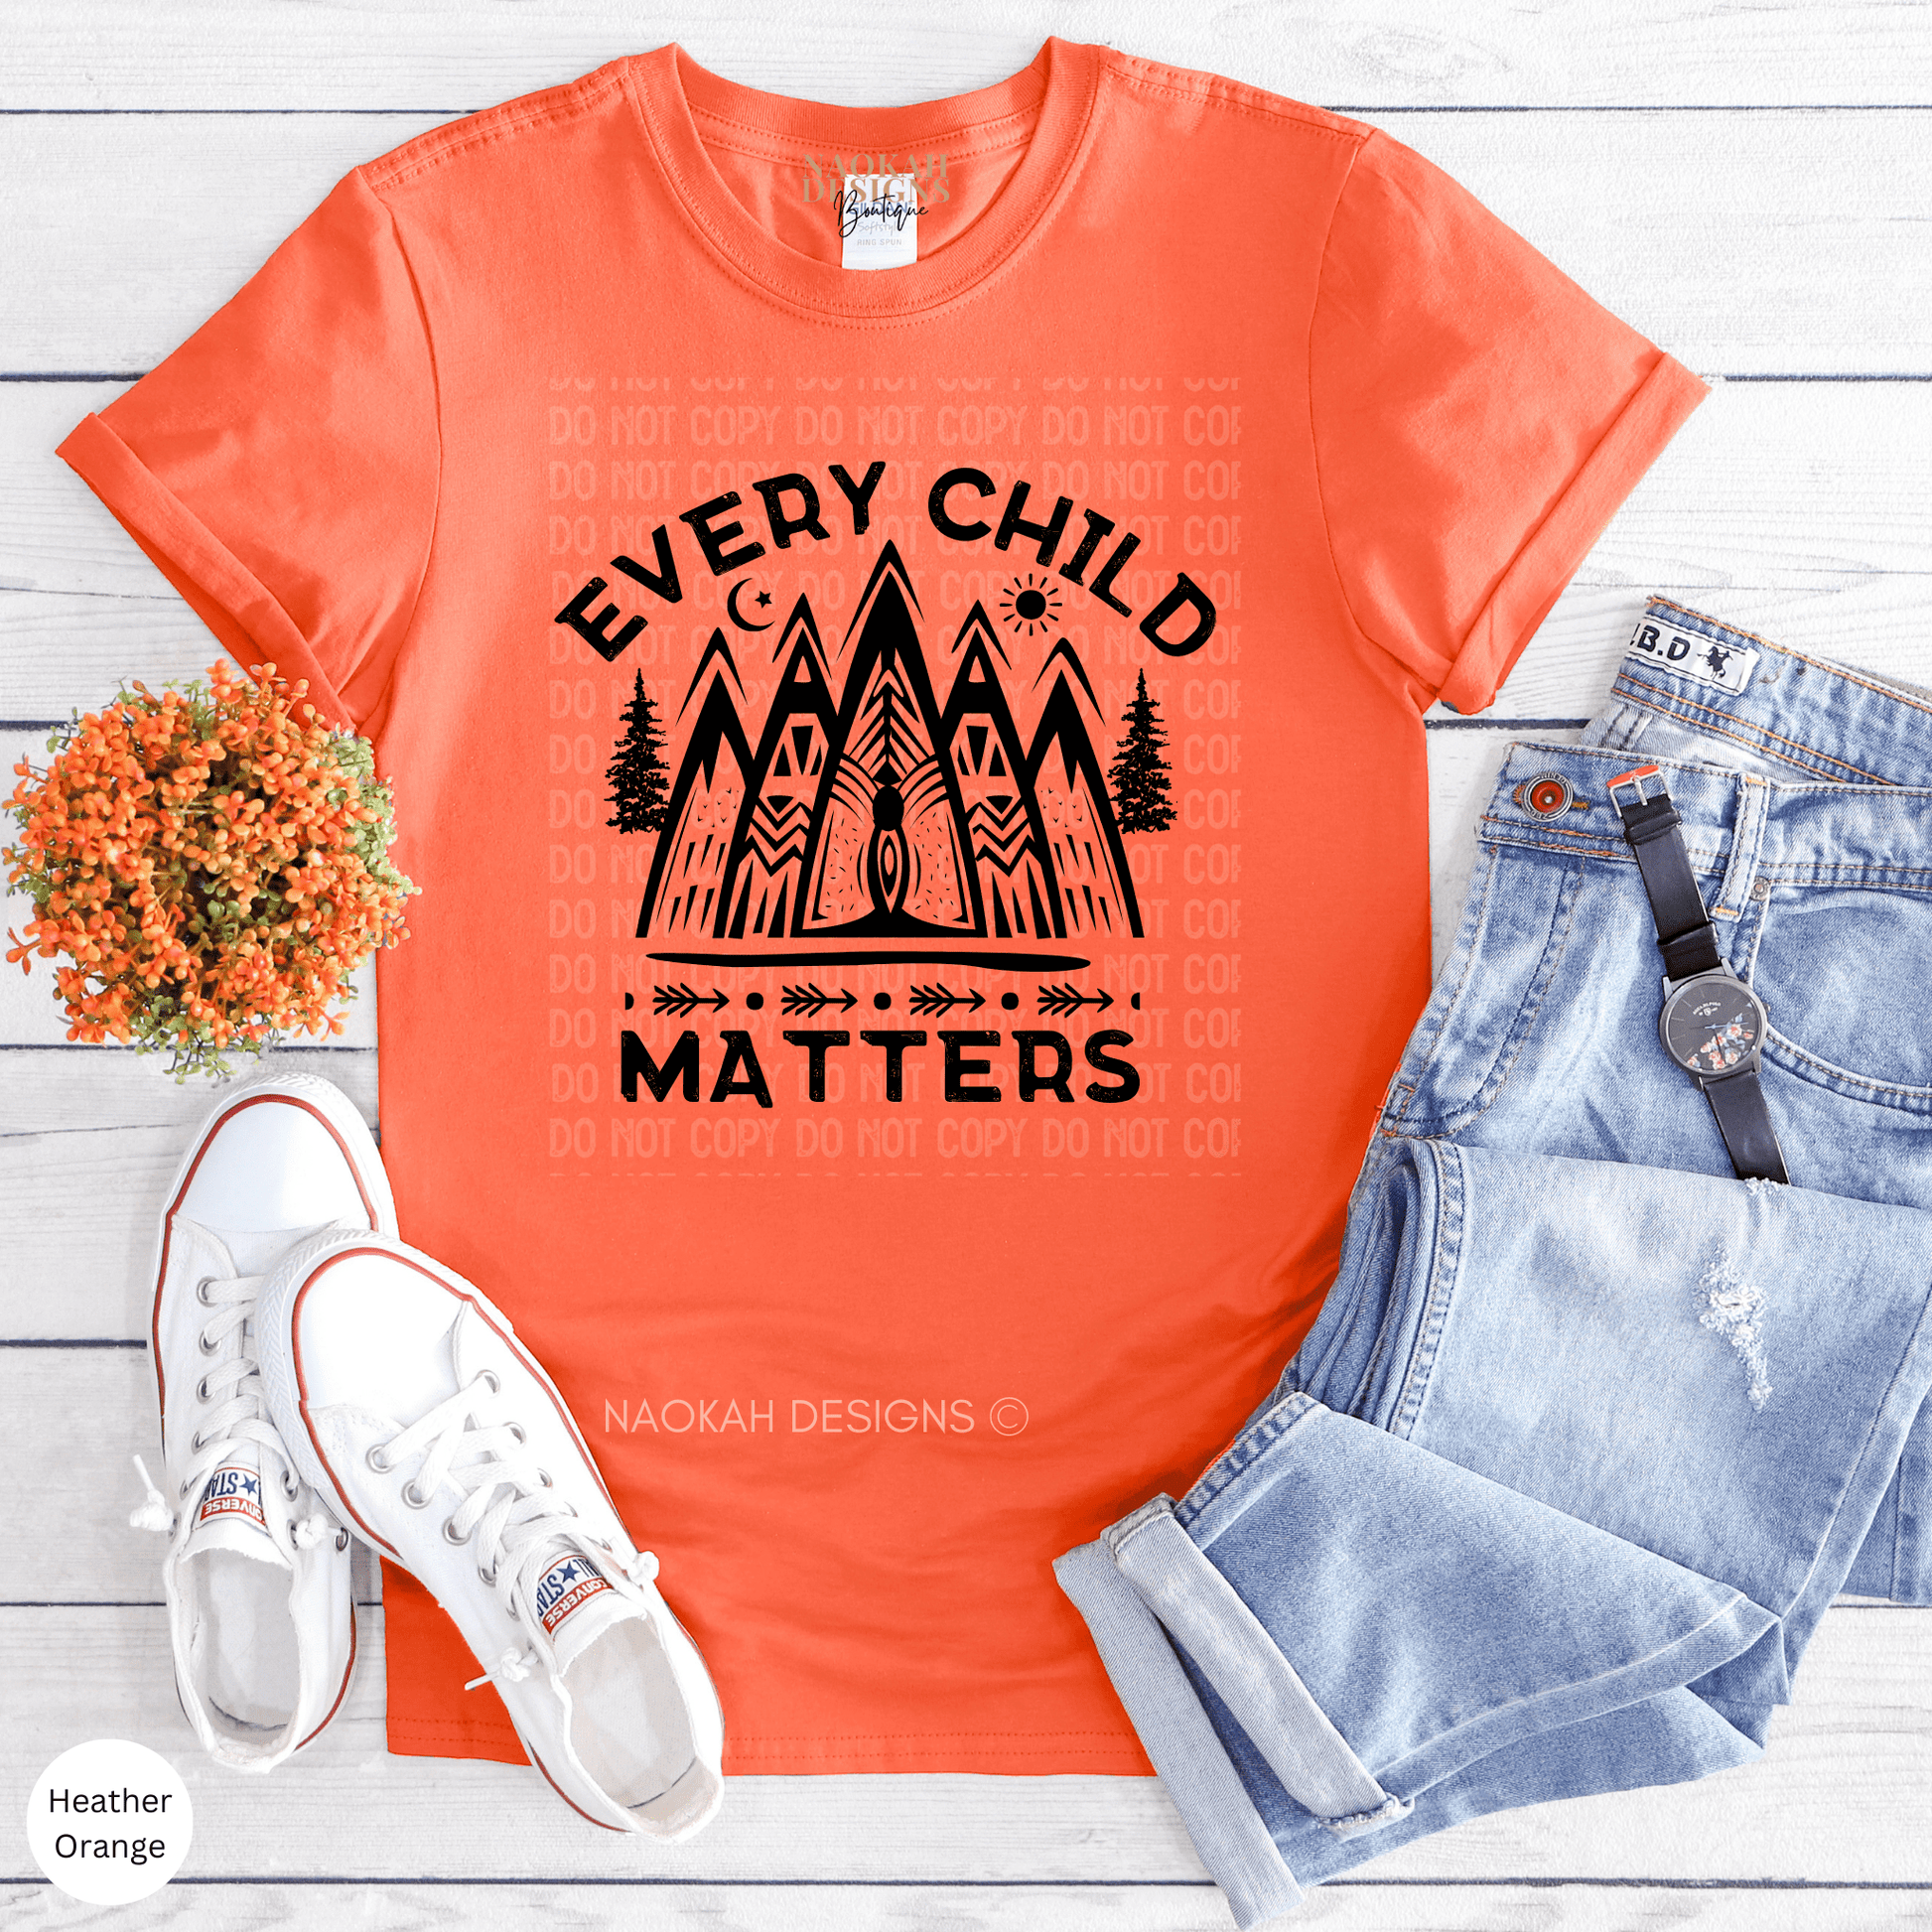 Every Child Matters Shirt PORTION DONATED, Orange Shirt Day Shirt, Indigenous Owned Shop, Orange Shirt, Truth and Reconciliation, Wanderlust